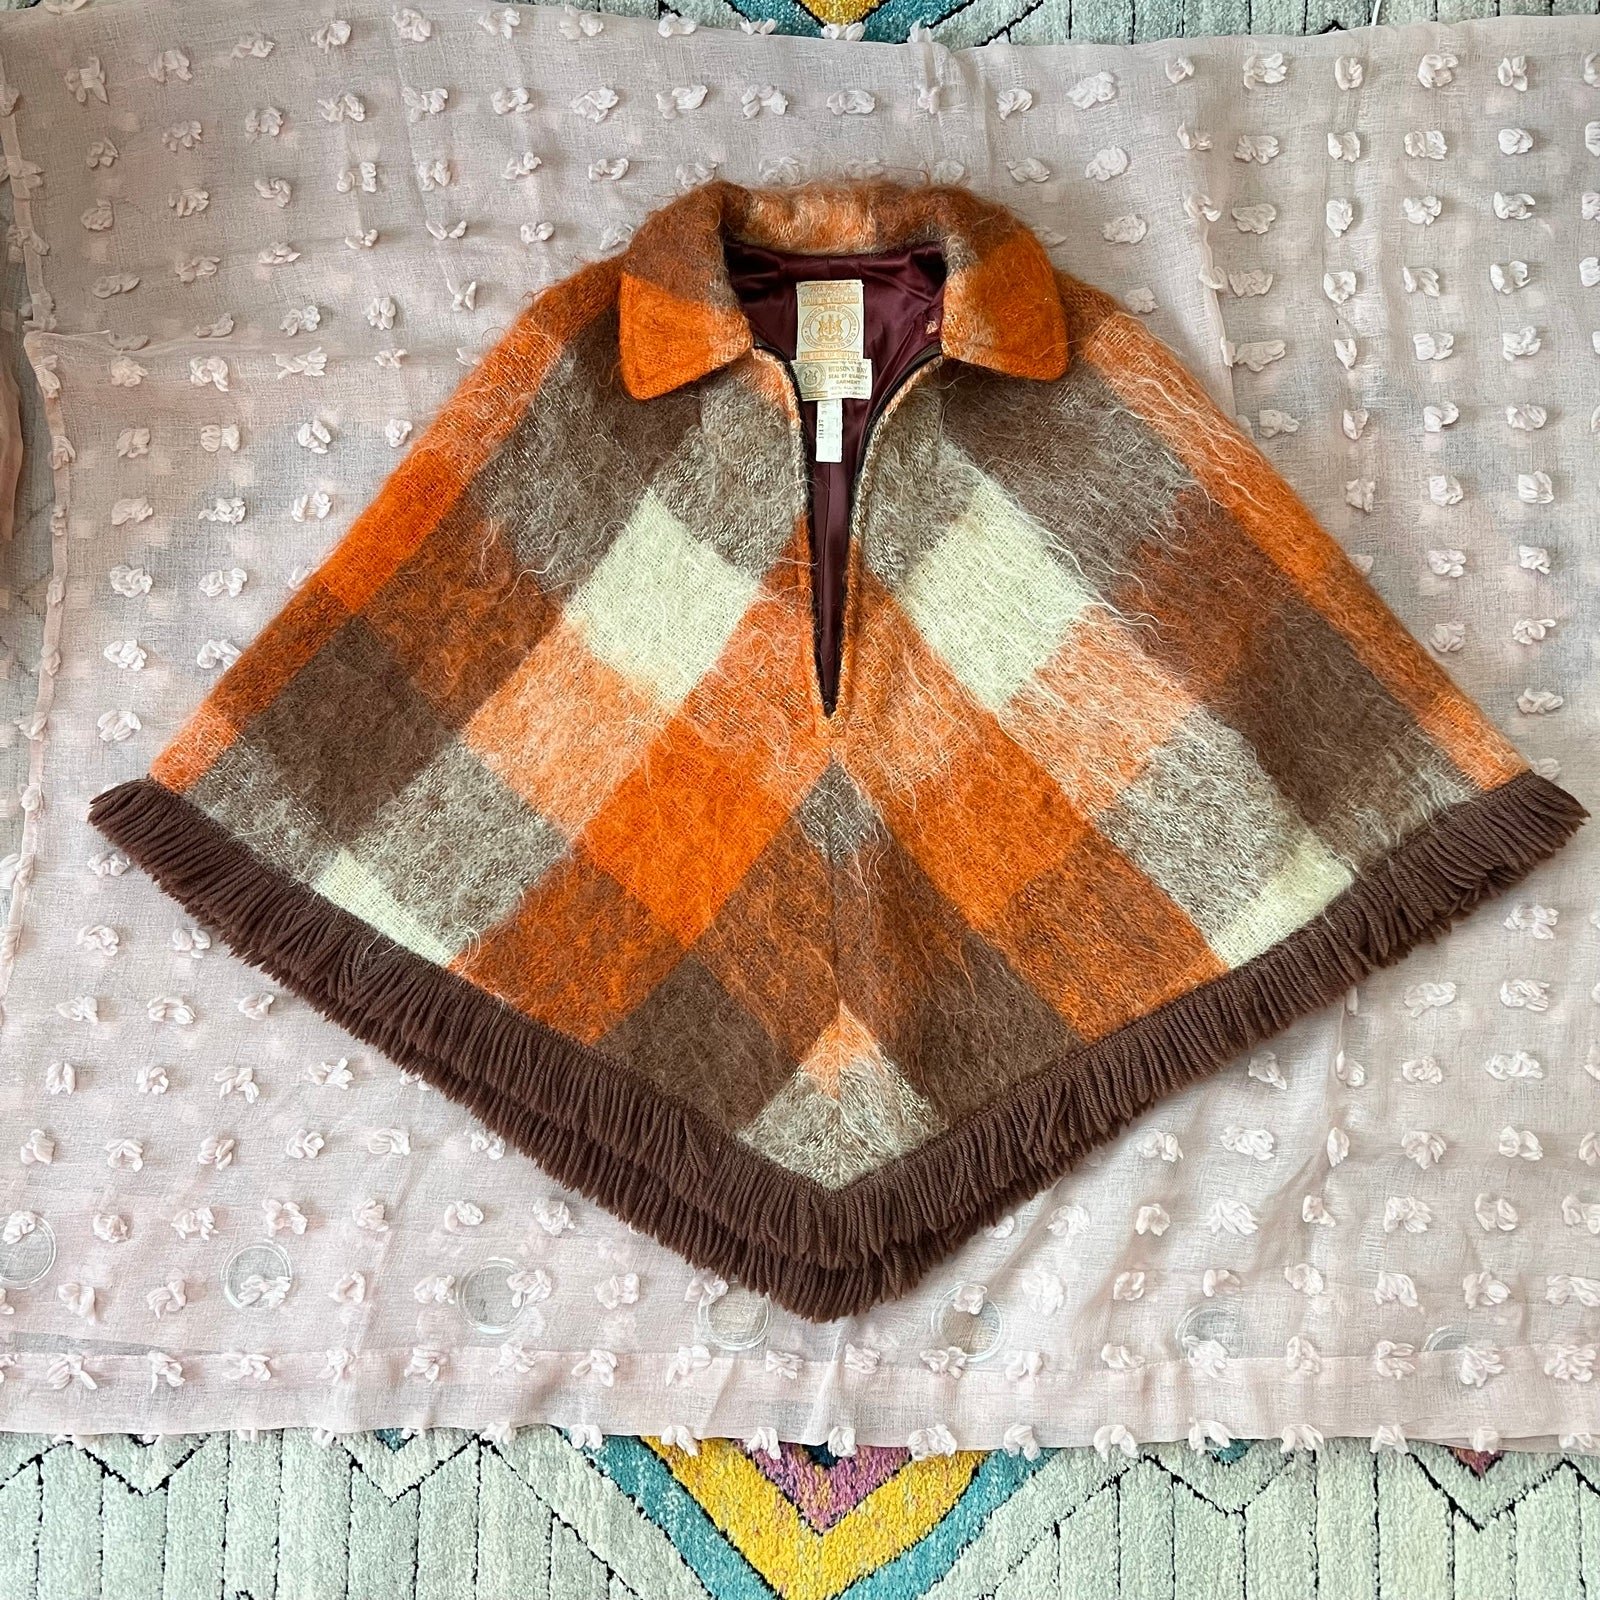 Popular Hudson Bay vintage mohair poncho/ cape 1970s p8nCtXwOy New Style